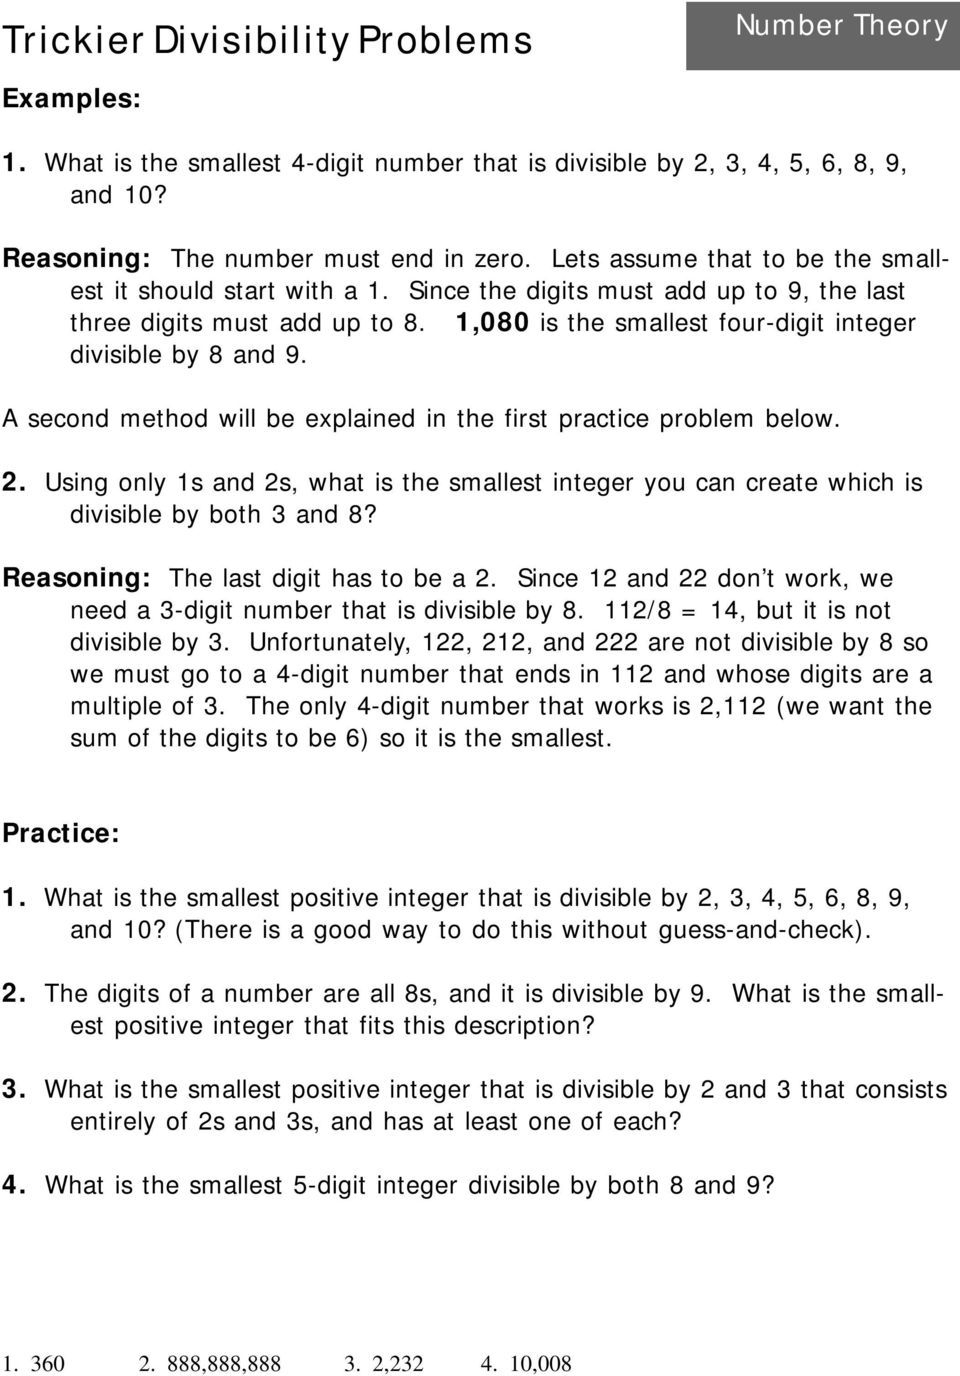 A second method will be explained in the first practice problem below.. Using only 1s and s, what is the smallest integer you can create which is divisible by both 3 and 8?